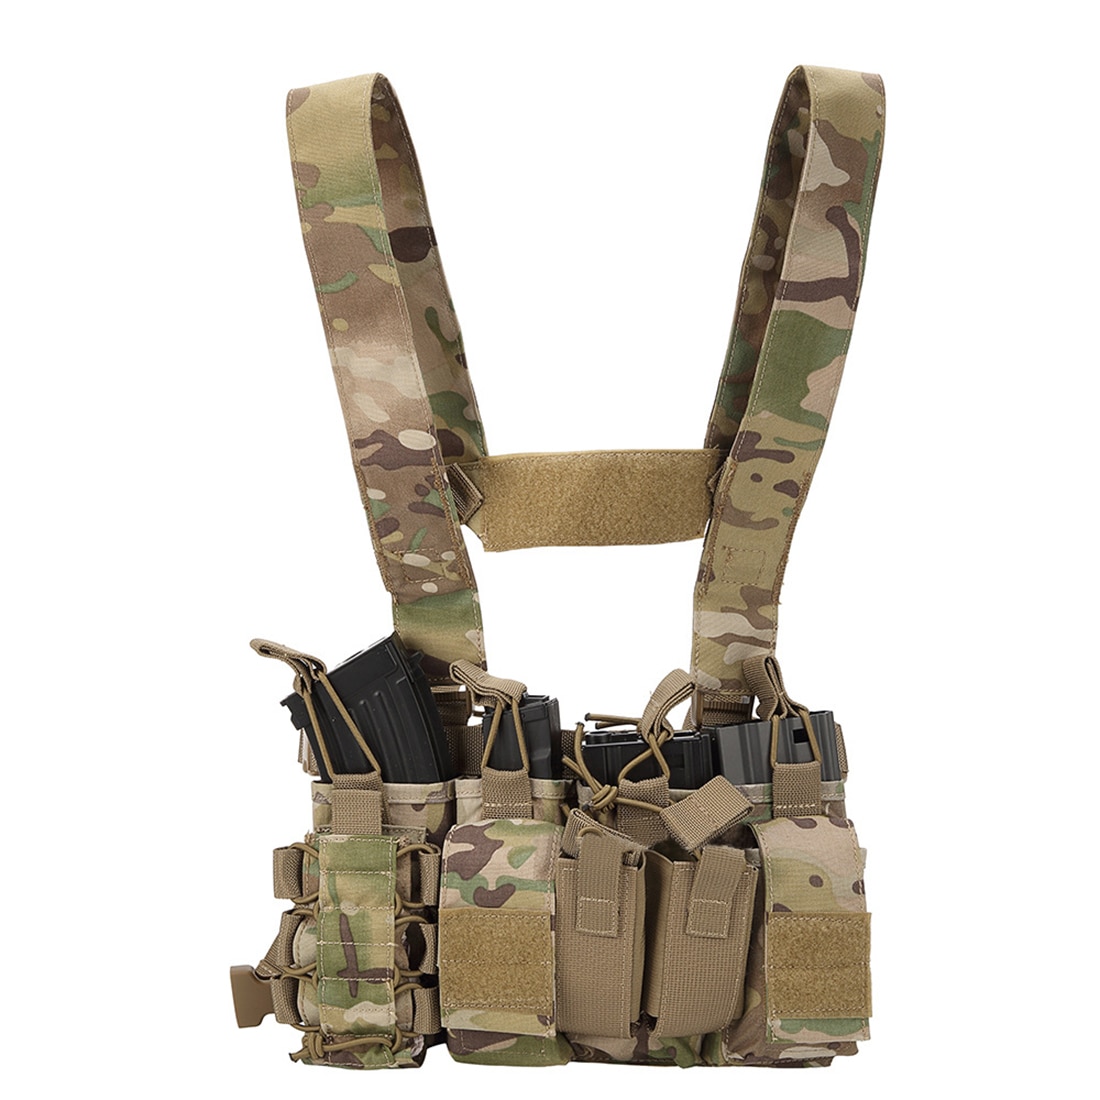  Tactical Hunting Vest Outdoor Airsoft Training Multi Pocket D3 Carrier Army  Rig Vest   Ʈ   